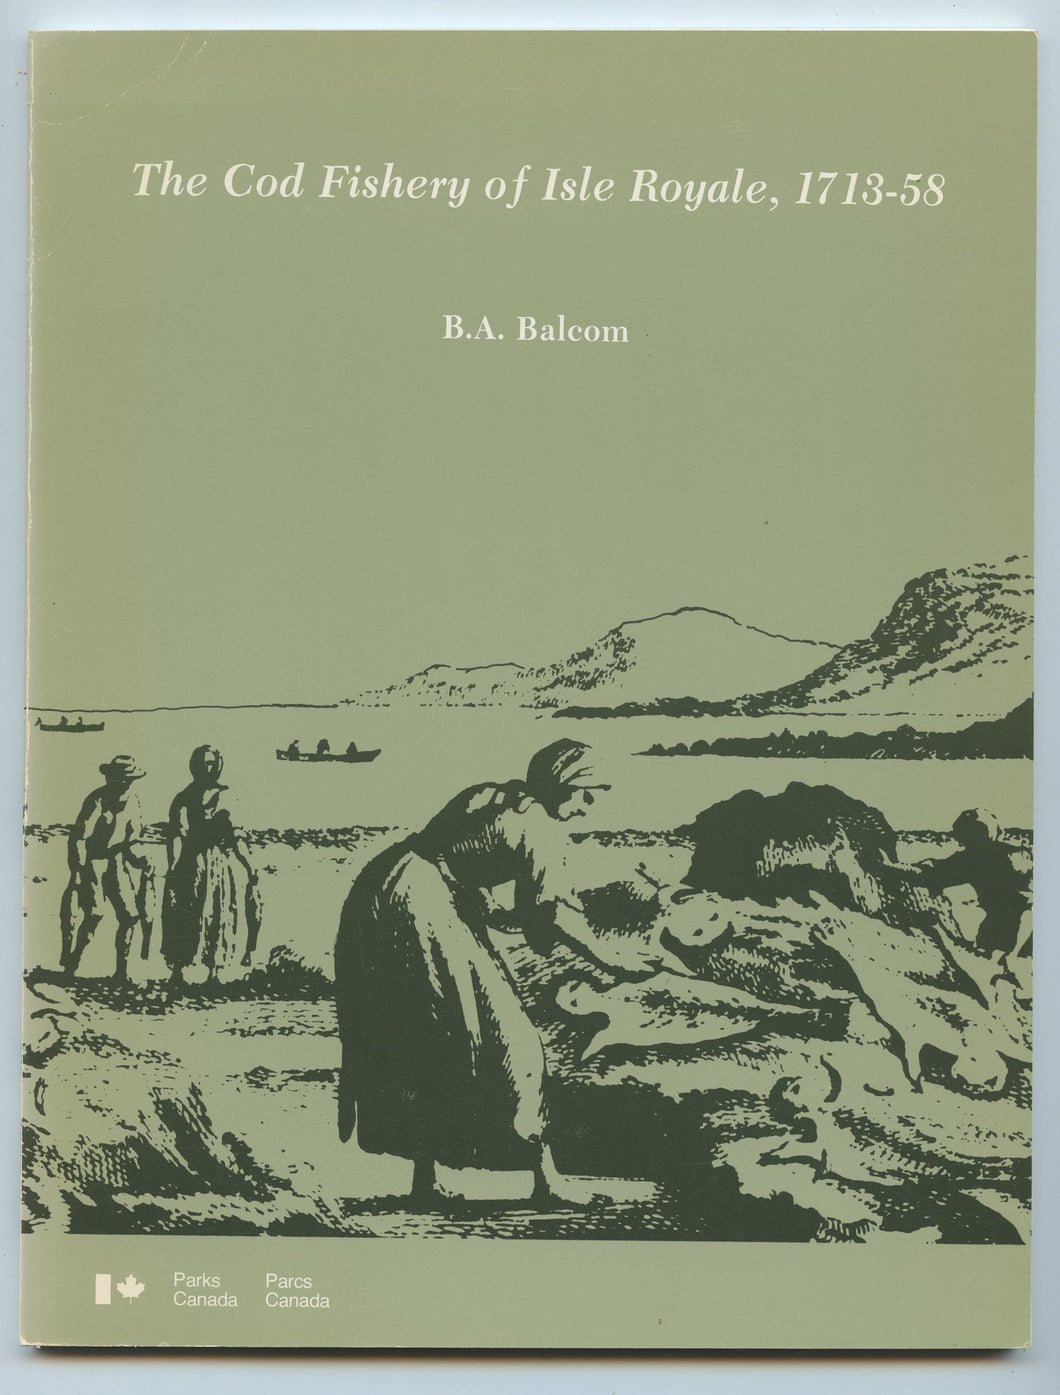 The Cod Fishery of Isle Royale, 1713-58